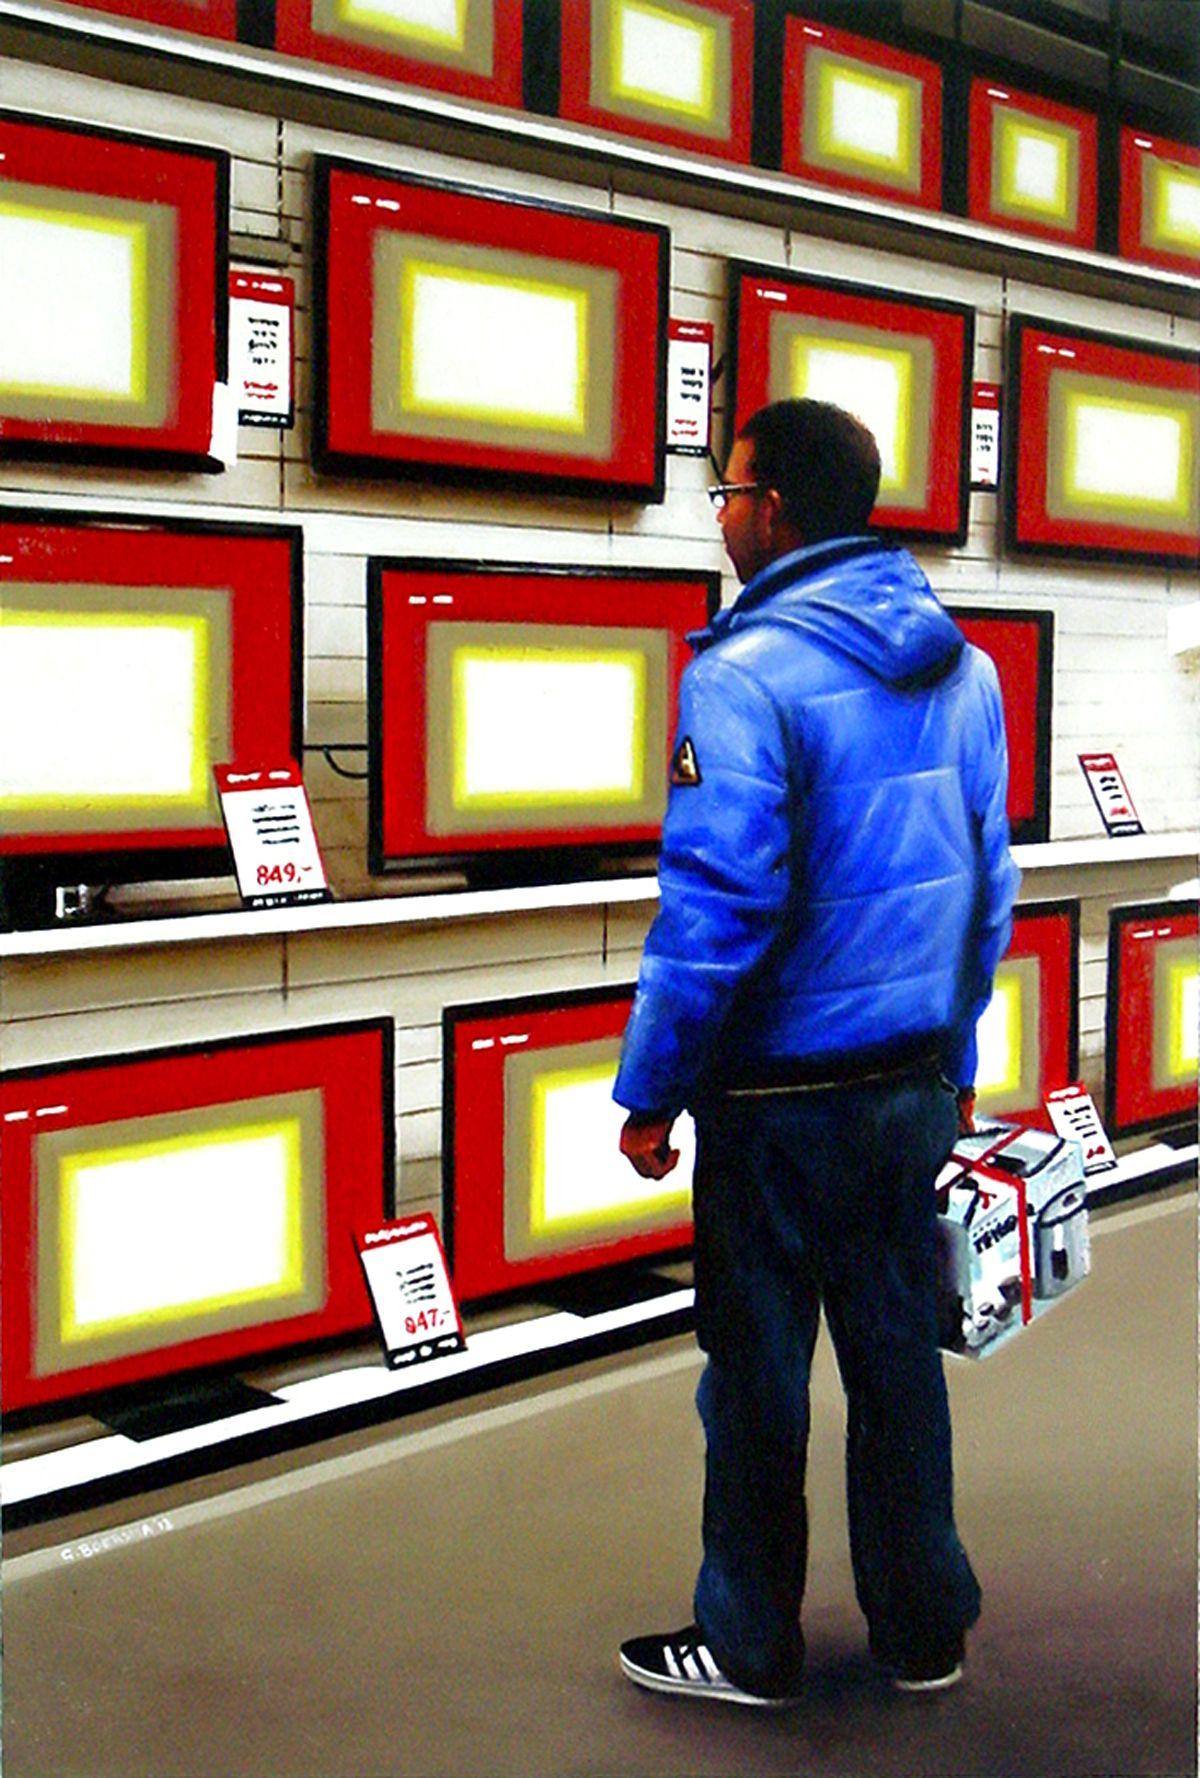 A man is looking to buy a new television in an electronic store. In his hand he's holding a new water boiler or something to that effect.     I like watching tv, but I also realize that tv automatically turns everything into entertainment including